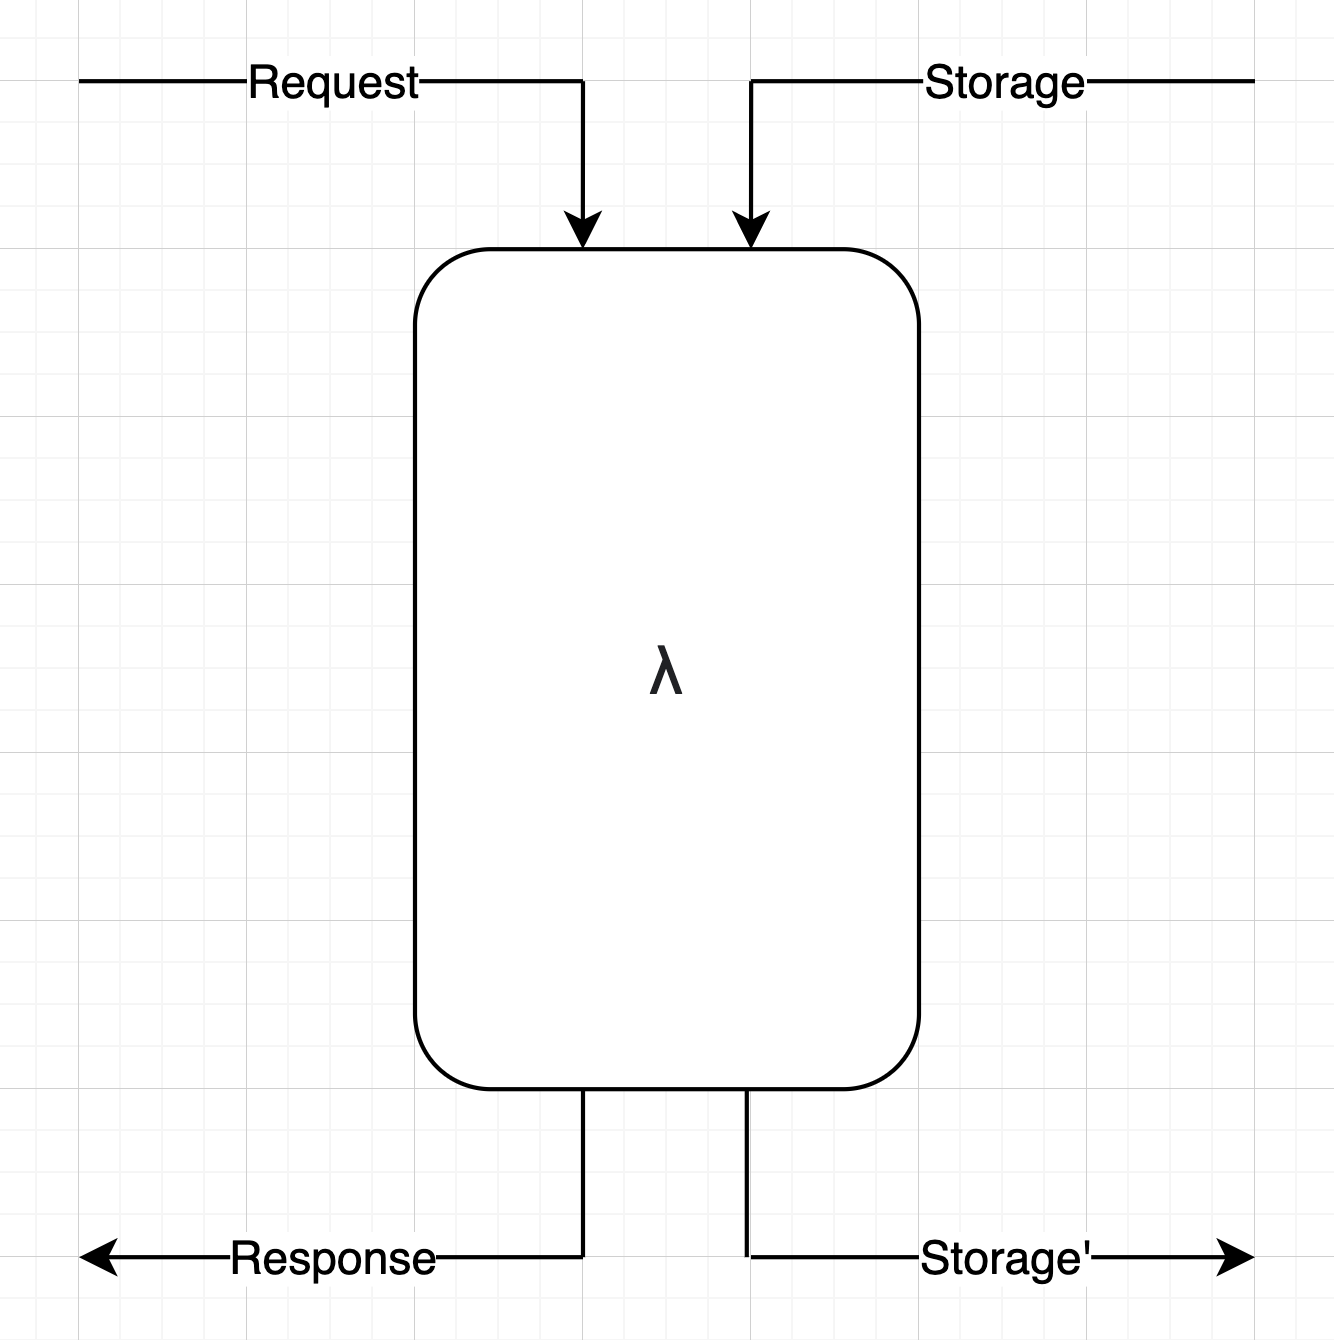 Diagram of a Simple Server: inputs are a Request and Storage; outputs are a Response and updated Storage